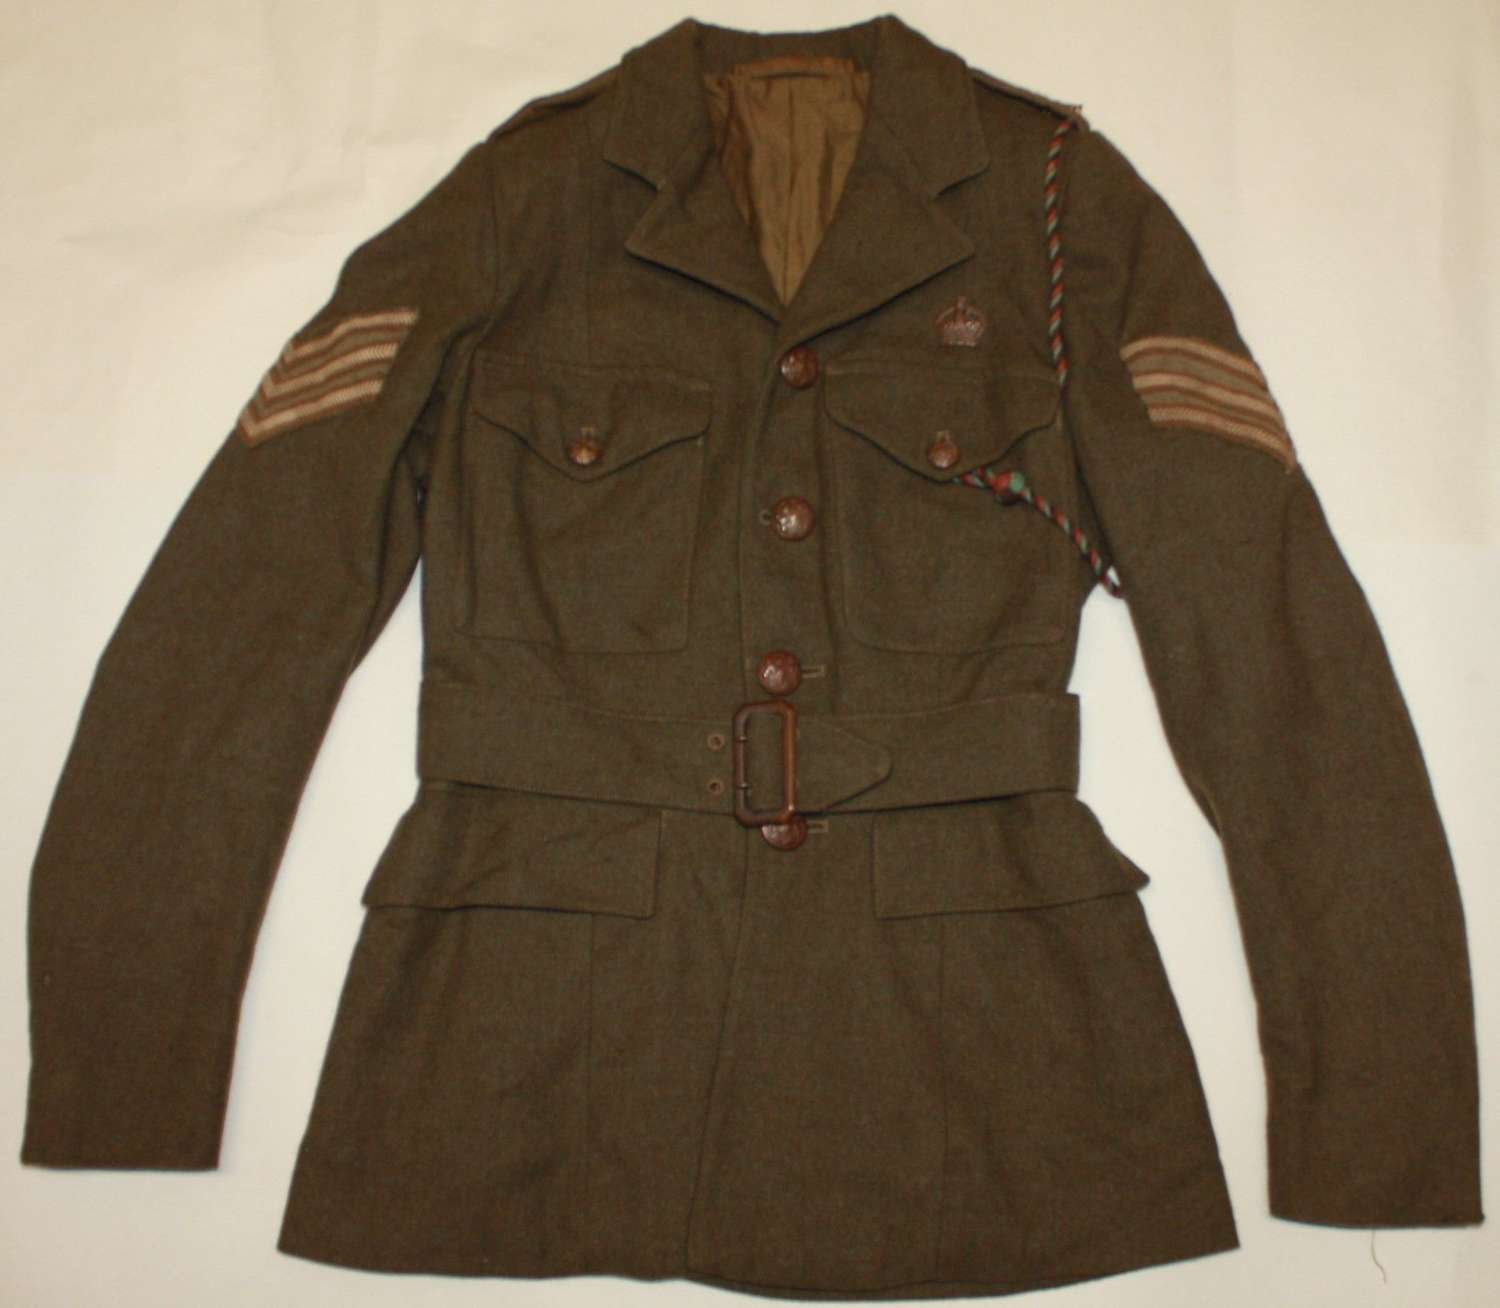 A GOOD USED WWI ATS JACKET SIZE 9 EXAMPLE 1943 DATED